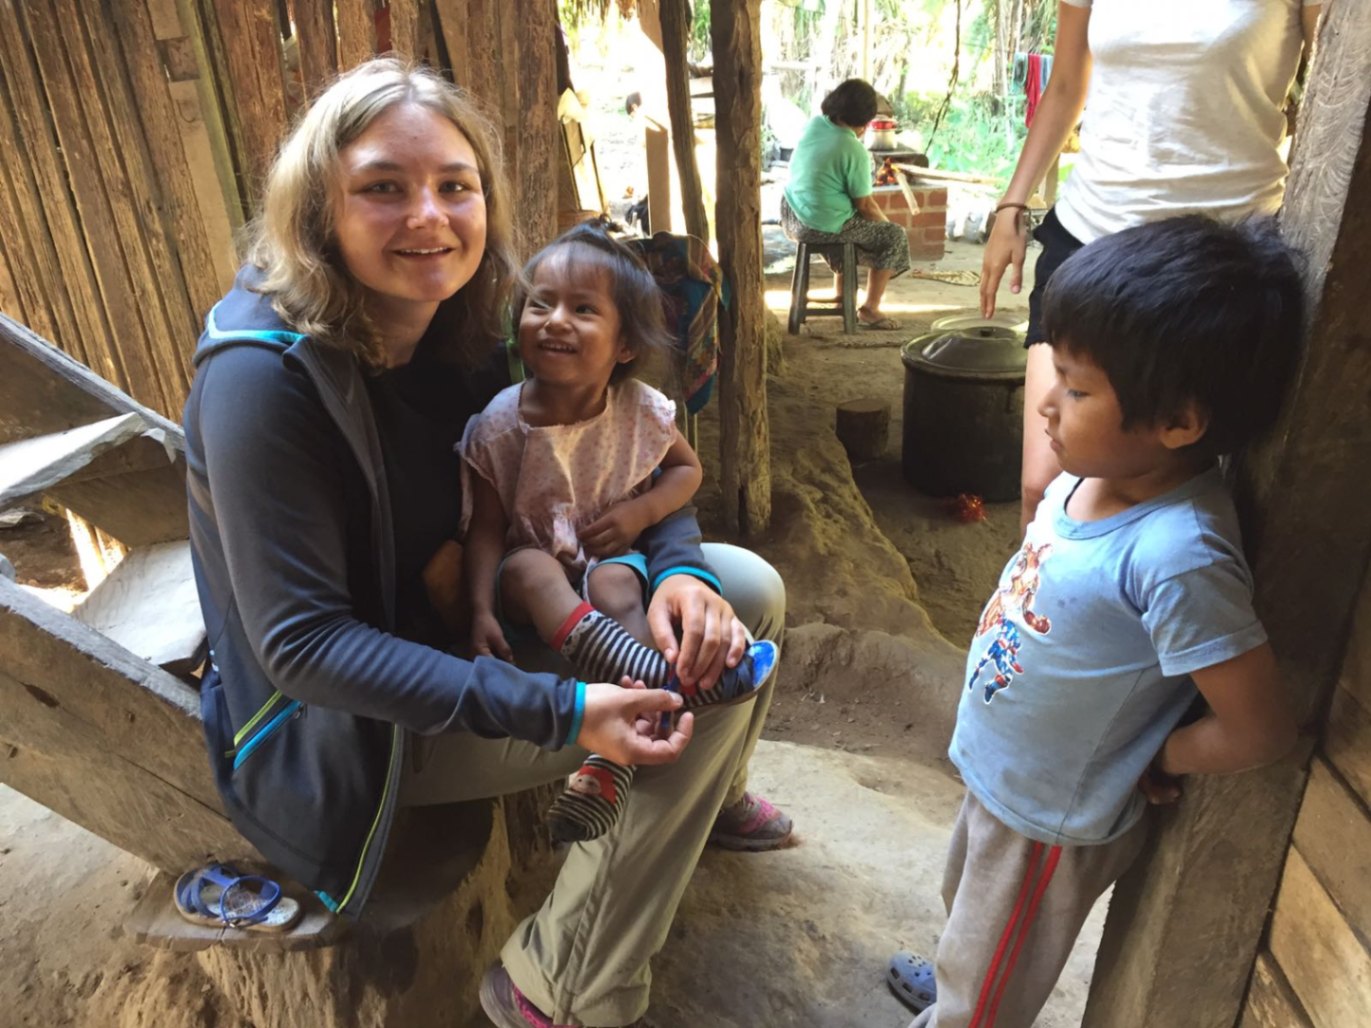 Vacancies for Volunteer Work in the Amazon - Find Out How to Apply